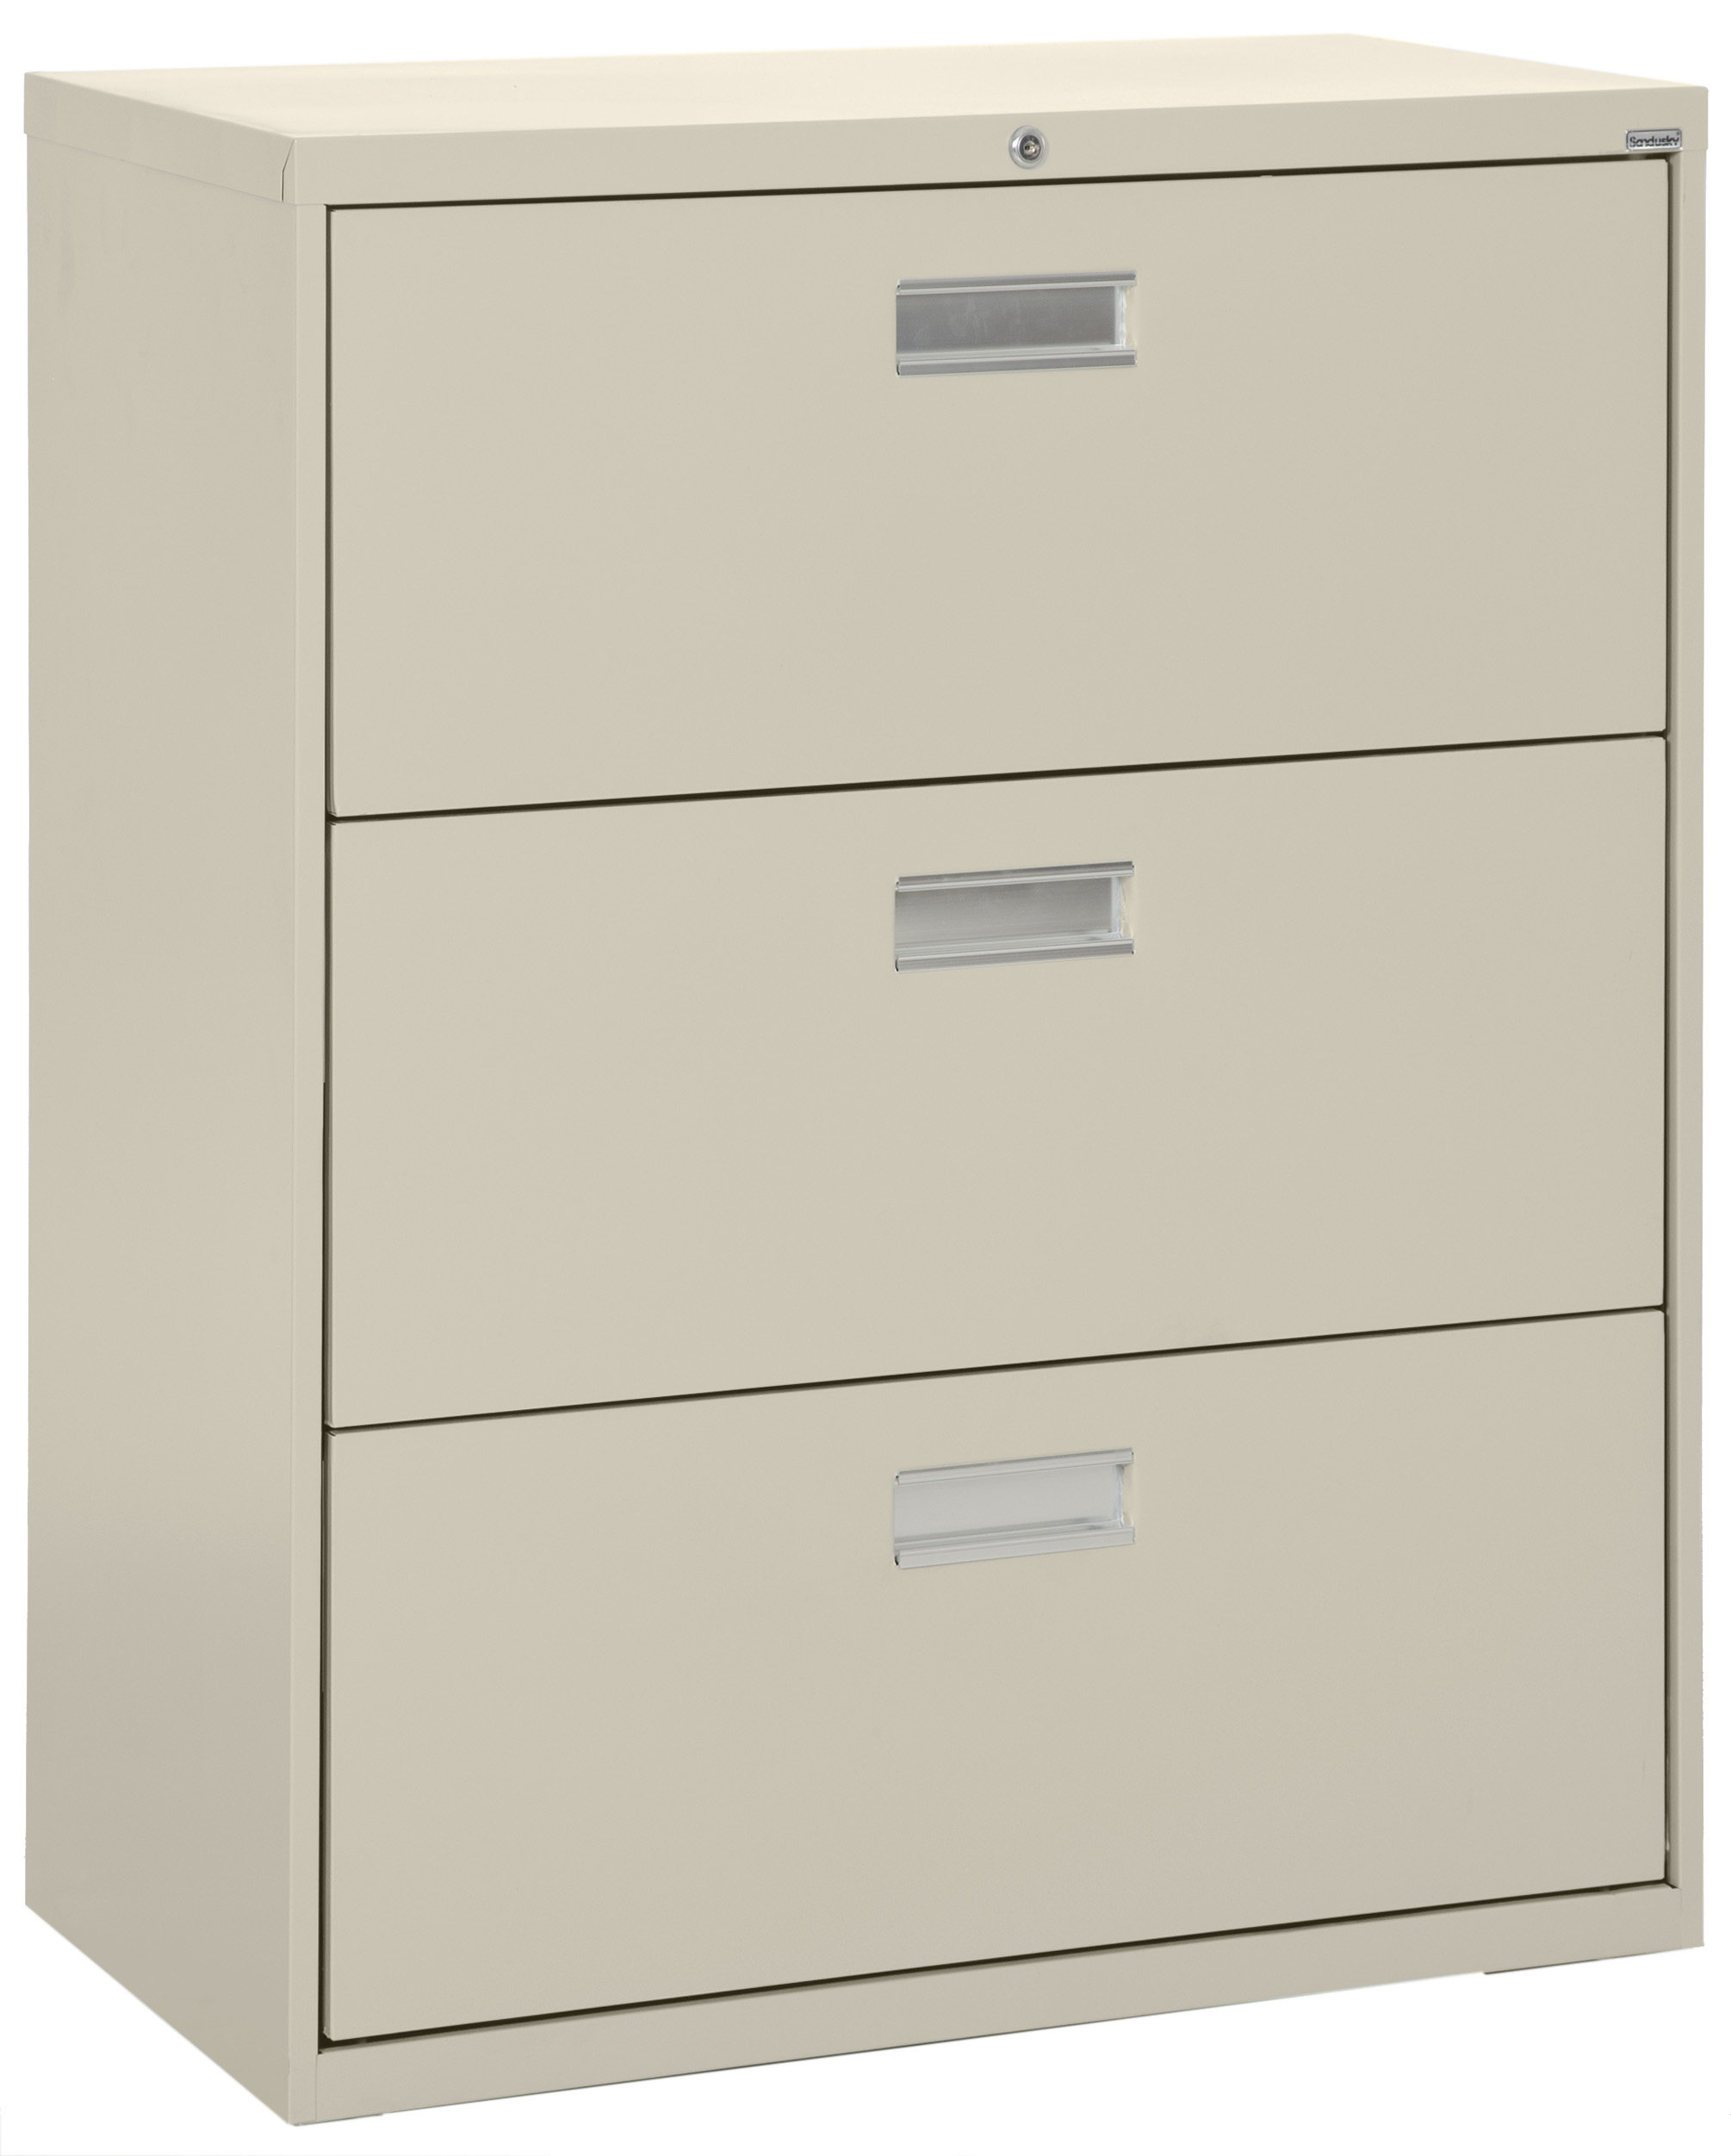 3 Drawer Lateral Filing Cabinet Reviews Joss Main in size 2010 X 2503